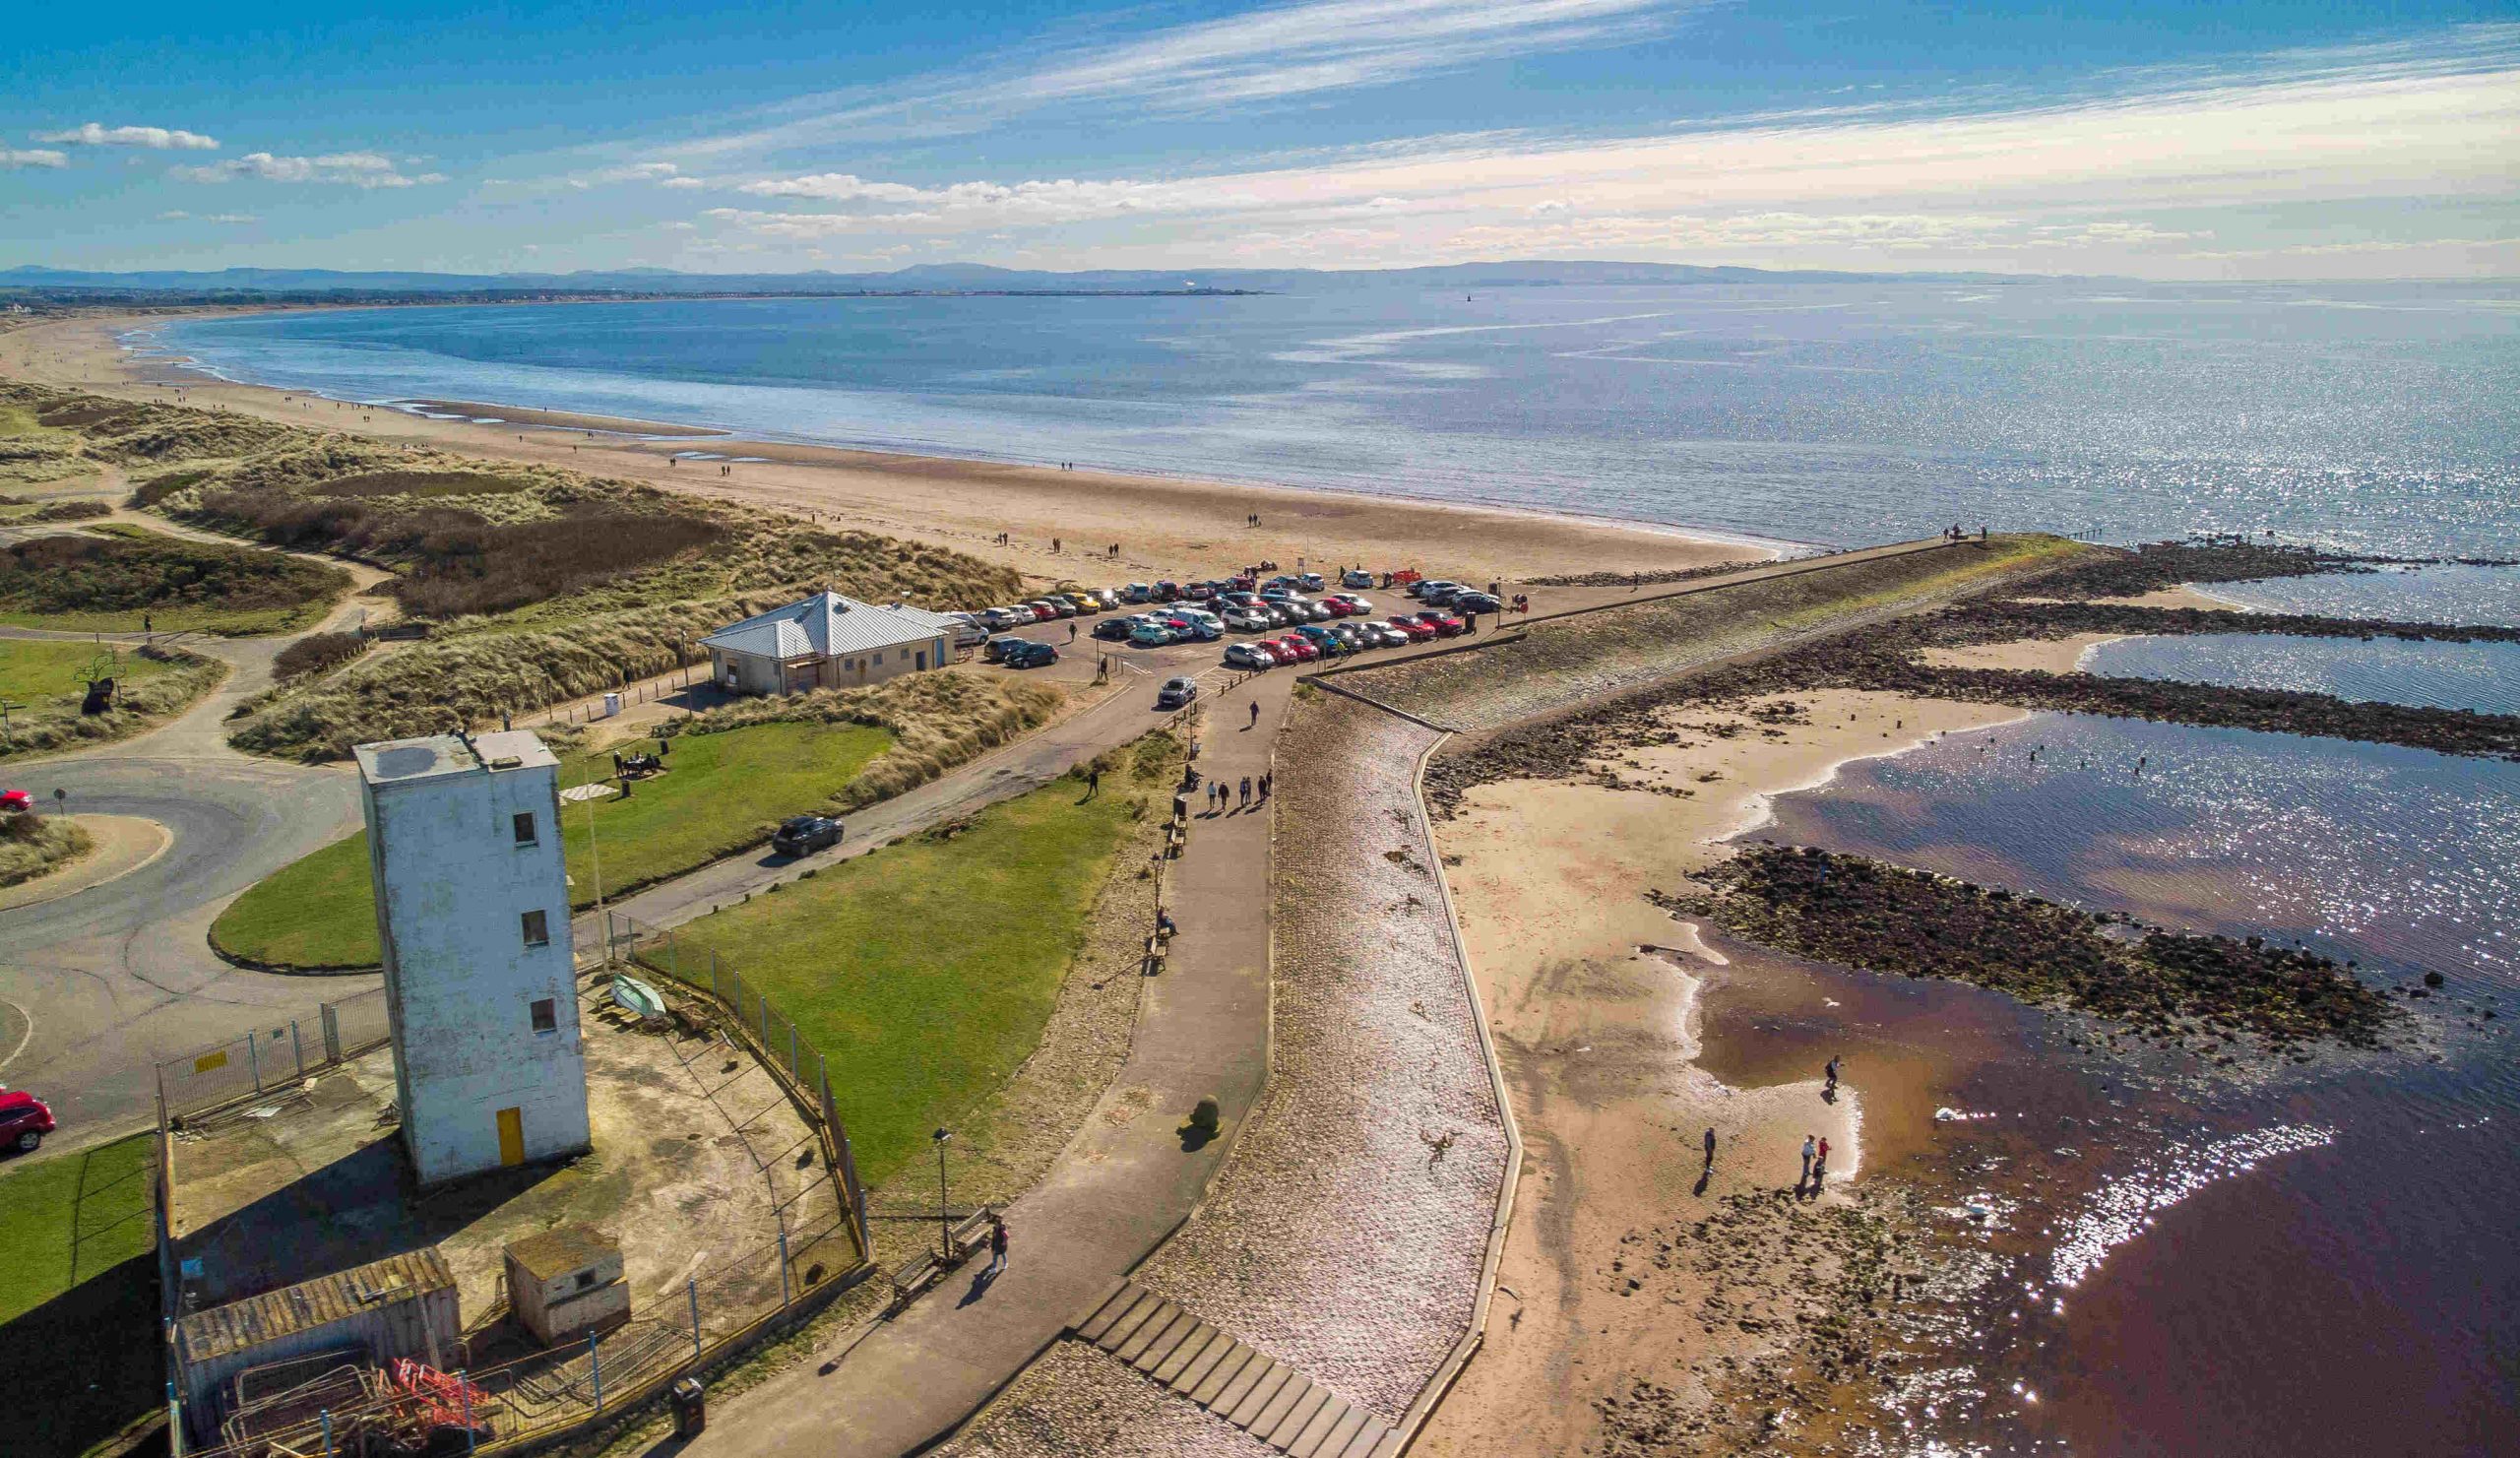 Image showing Irvine Beach and Beach Park from above